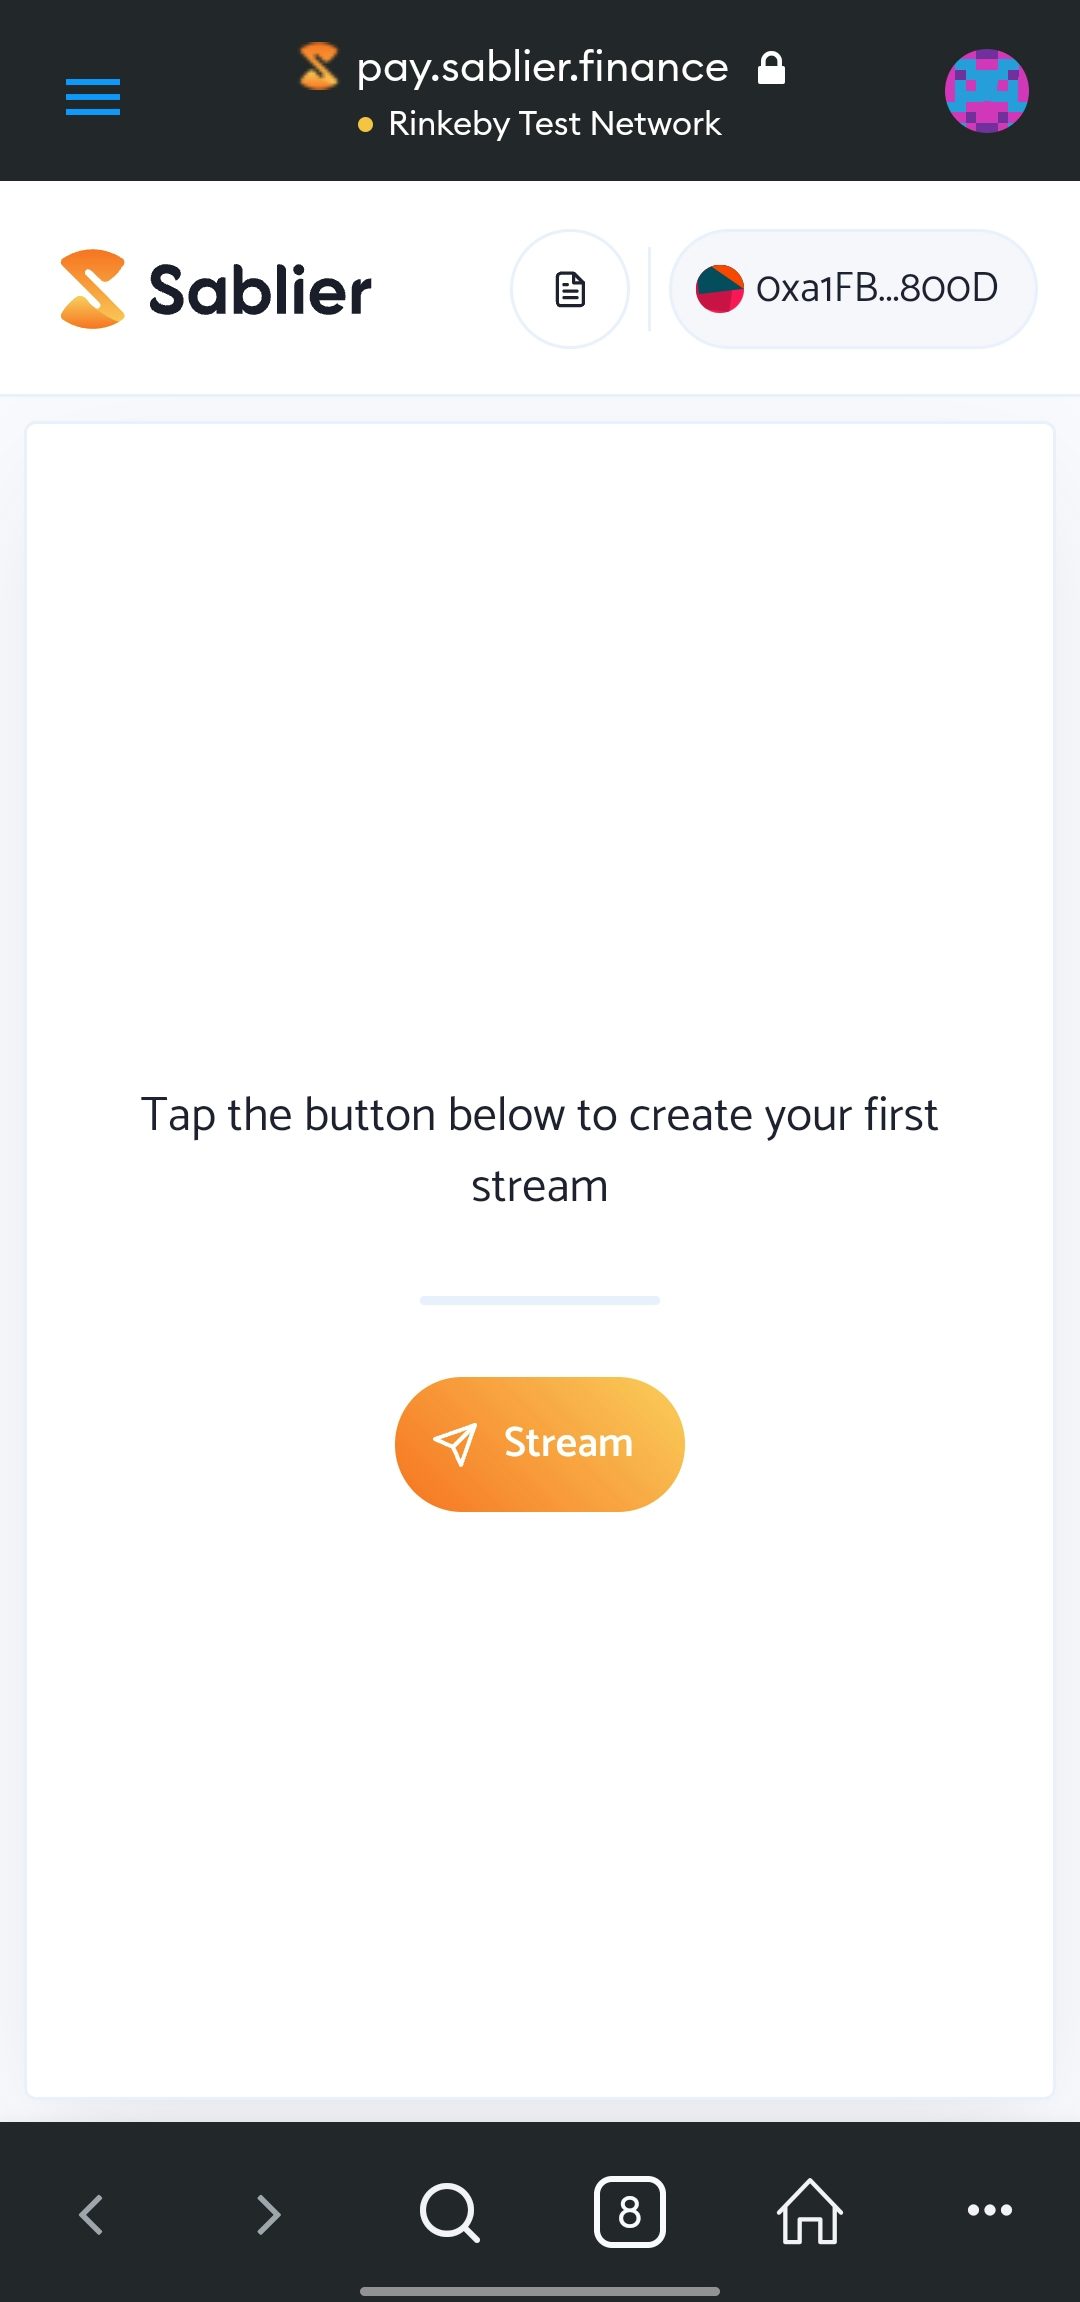 Click the Stream button to start streaming income.